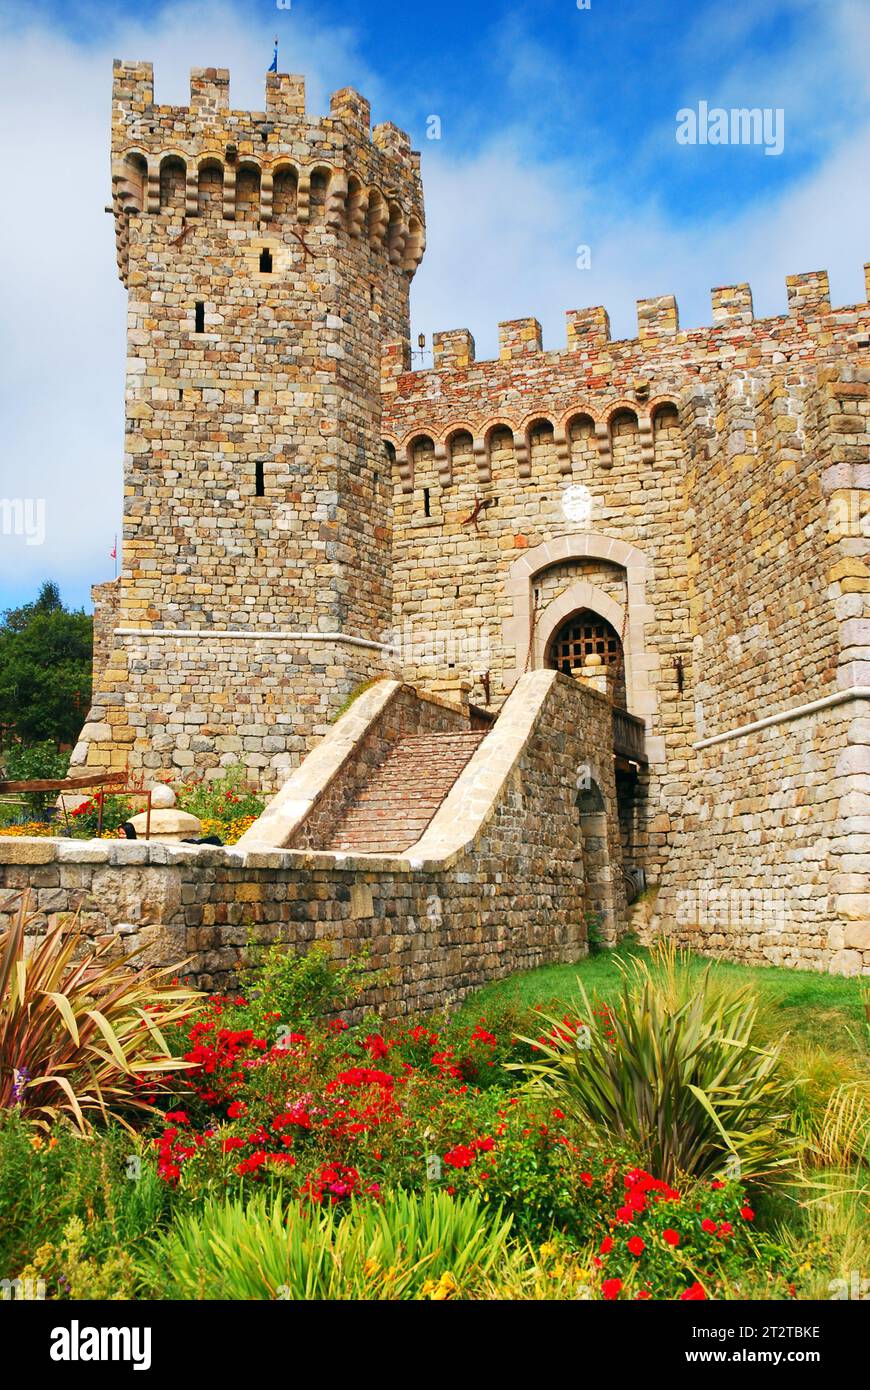 A winery in the Napa Valley of California is built to resemble a Medieval European stone castle in the center of a vineyard Stock Photo